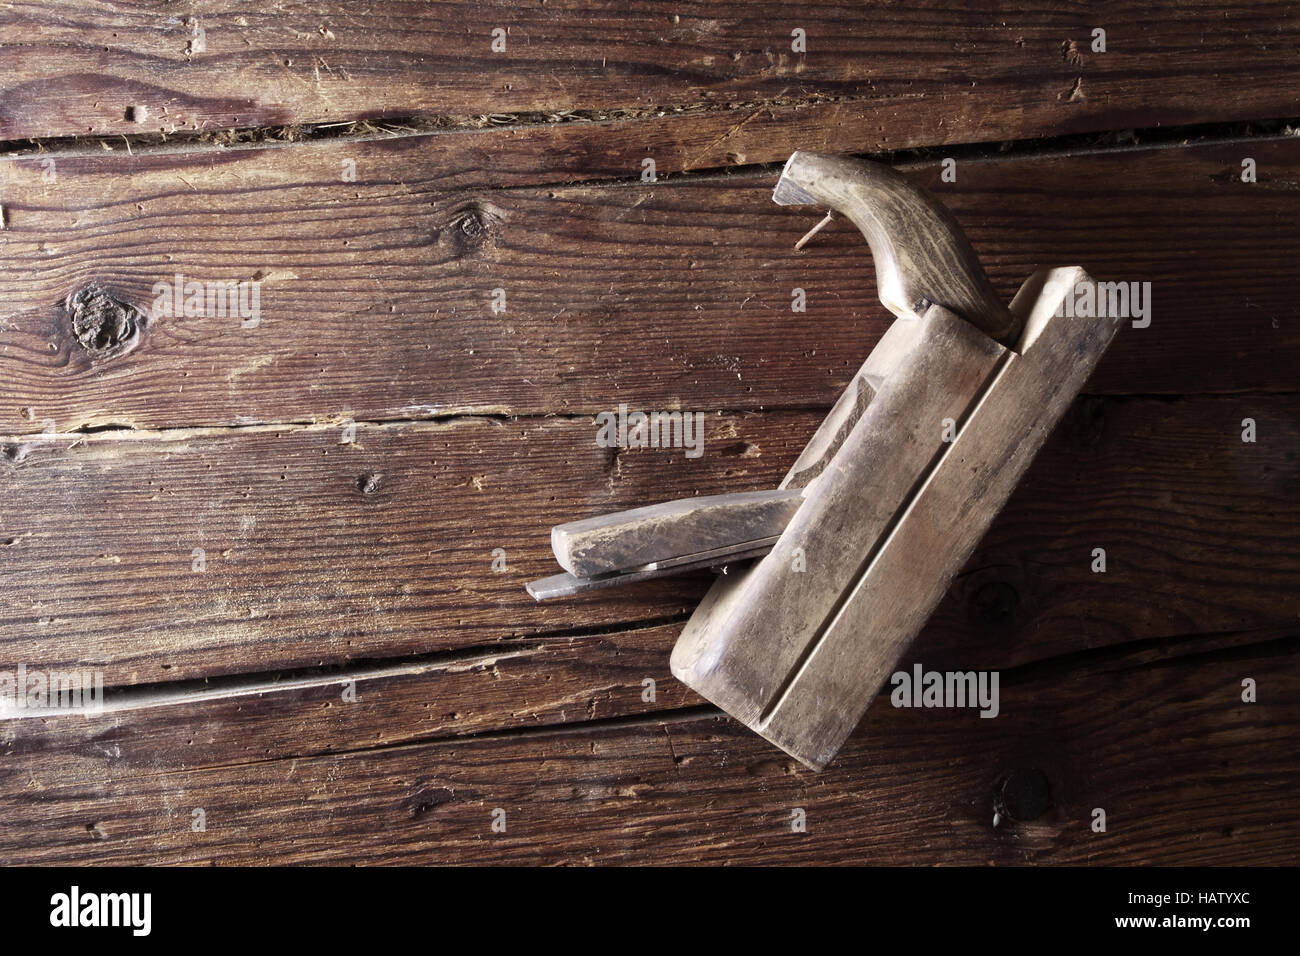 old wooden planer Stock Photo